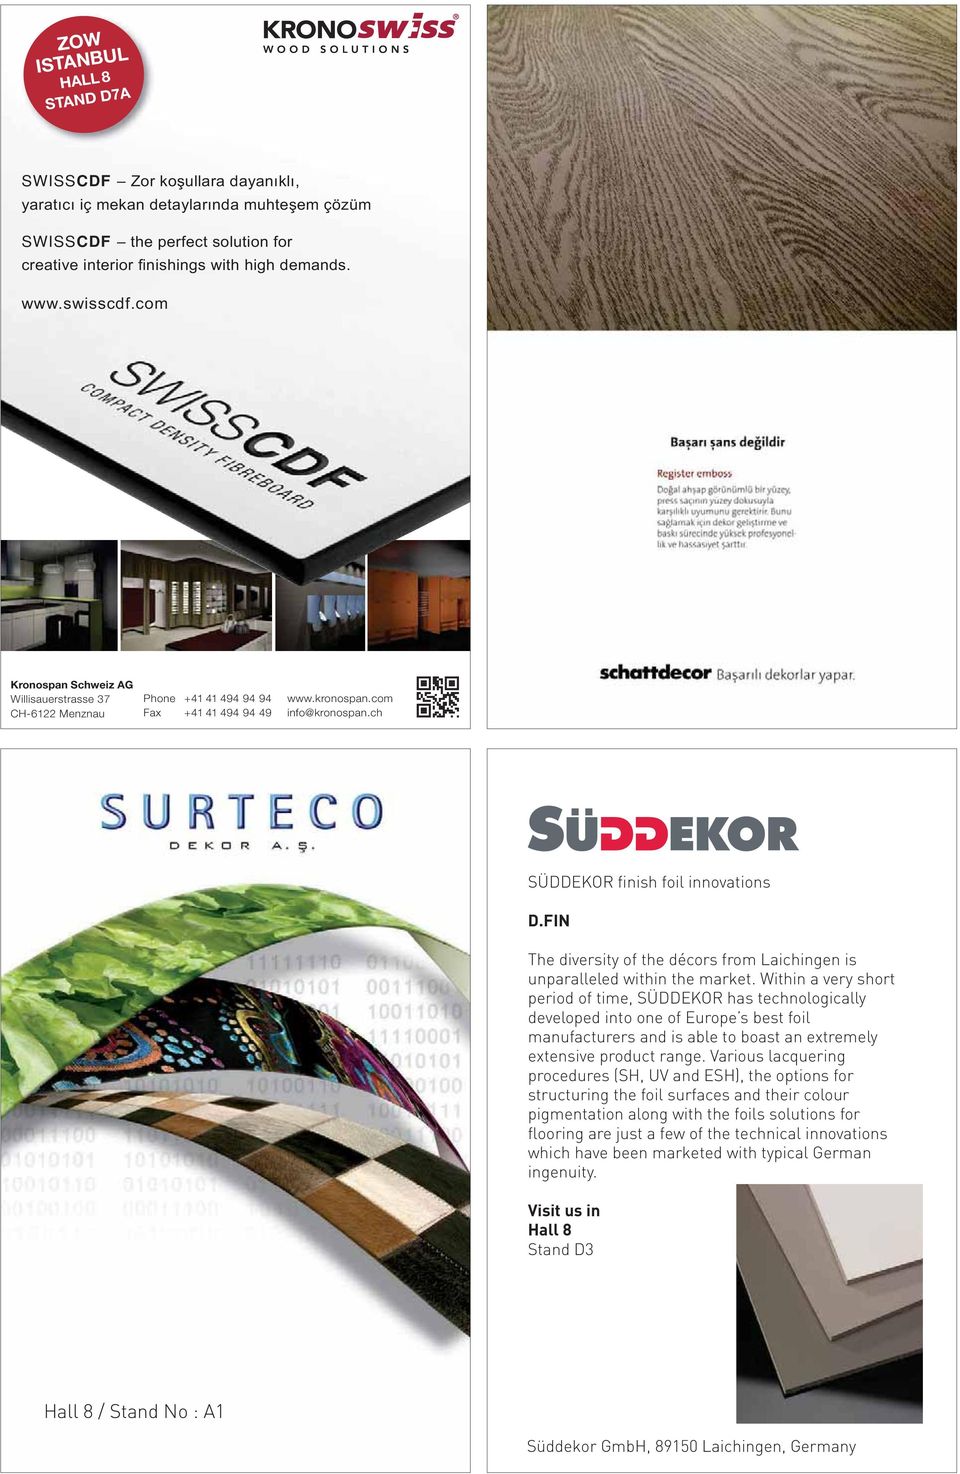 Within a very short period of time, SÜDDEKOR has technologically developed into one of Europe s best foil manufacturers and is able to boast an extremely extensive product range.